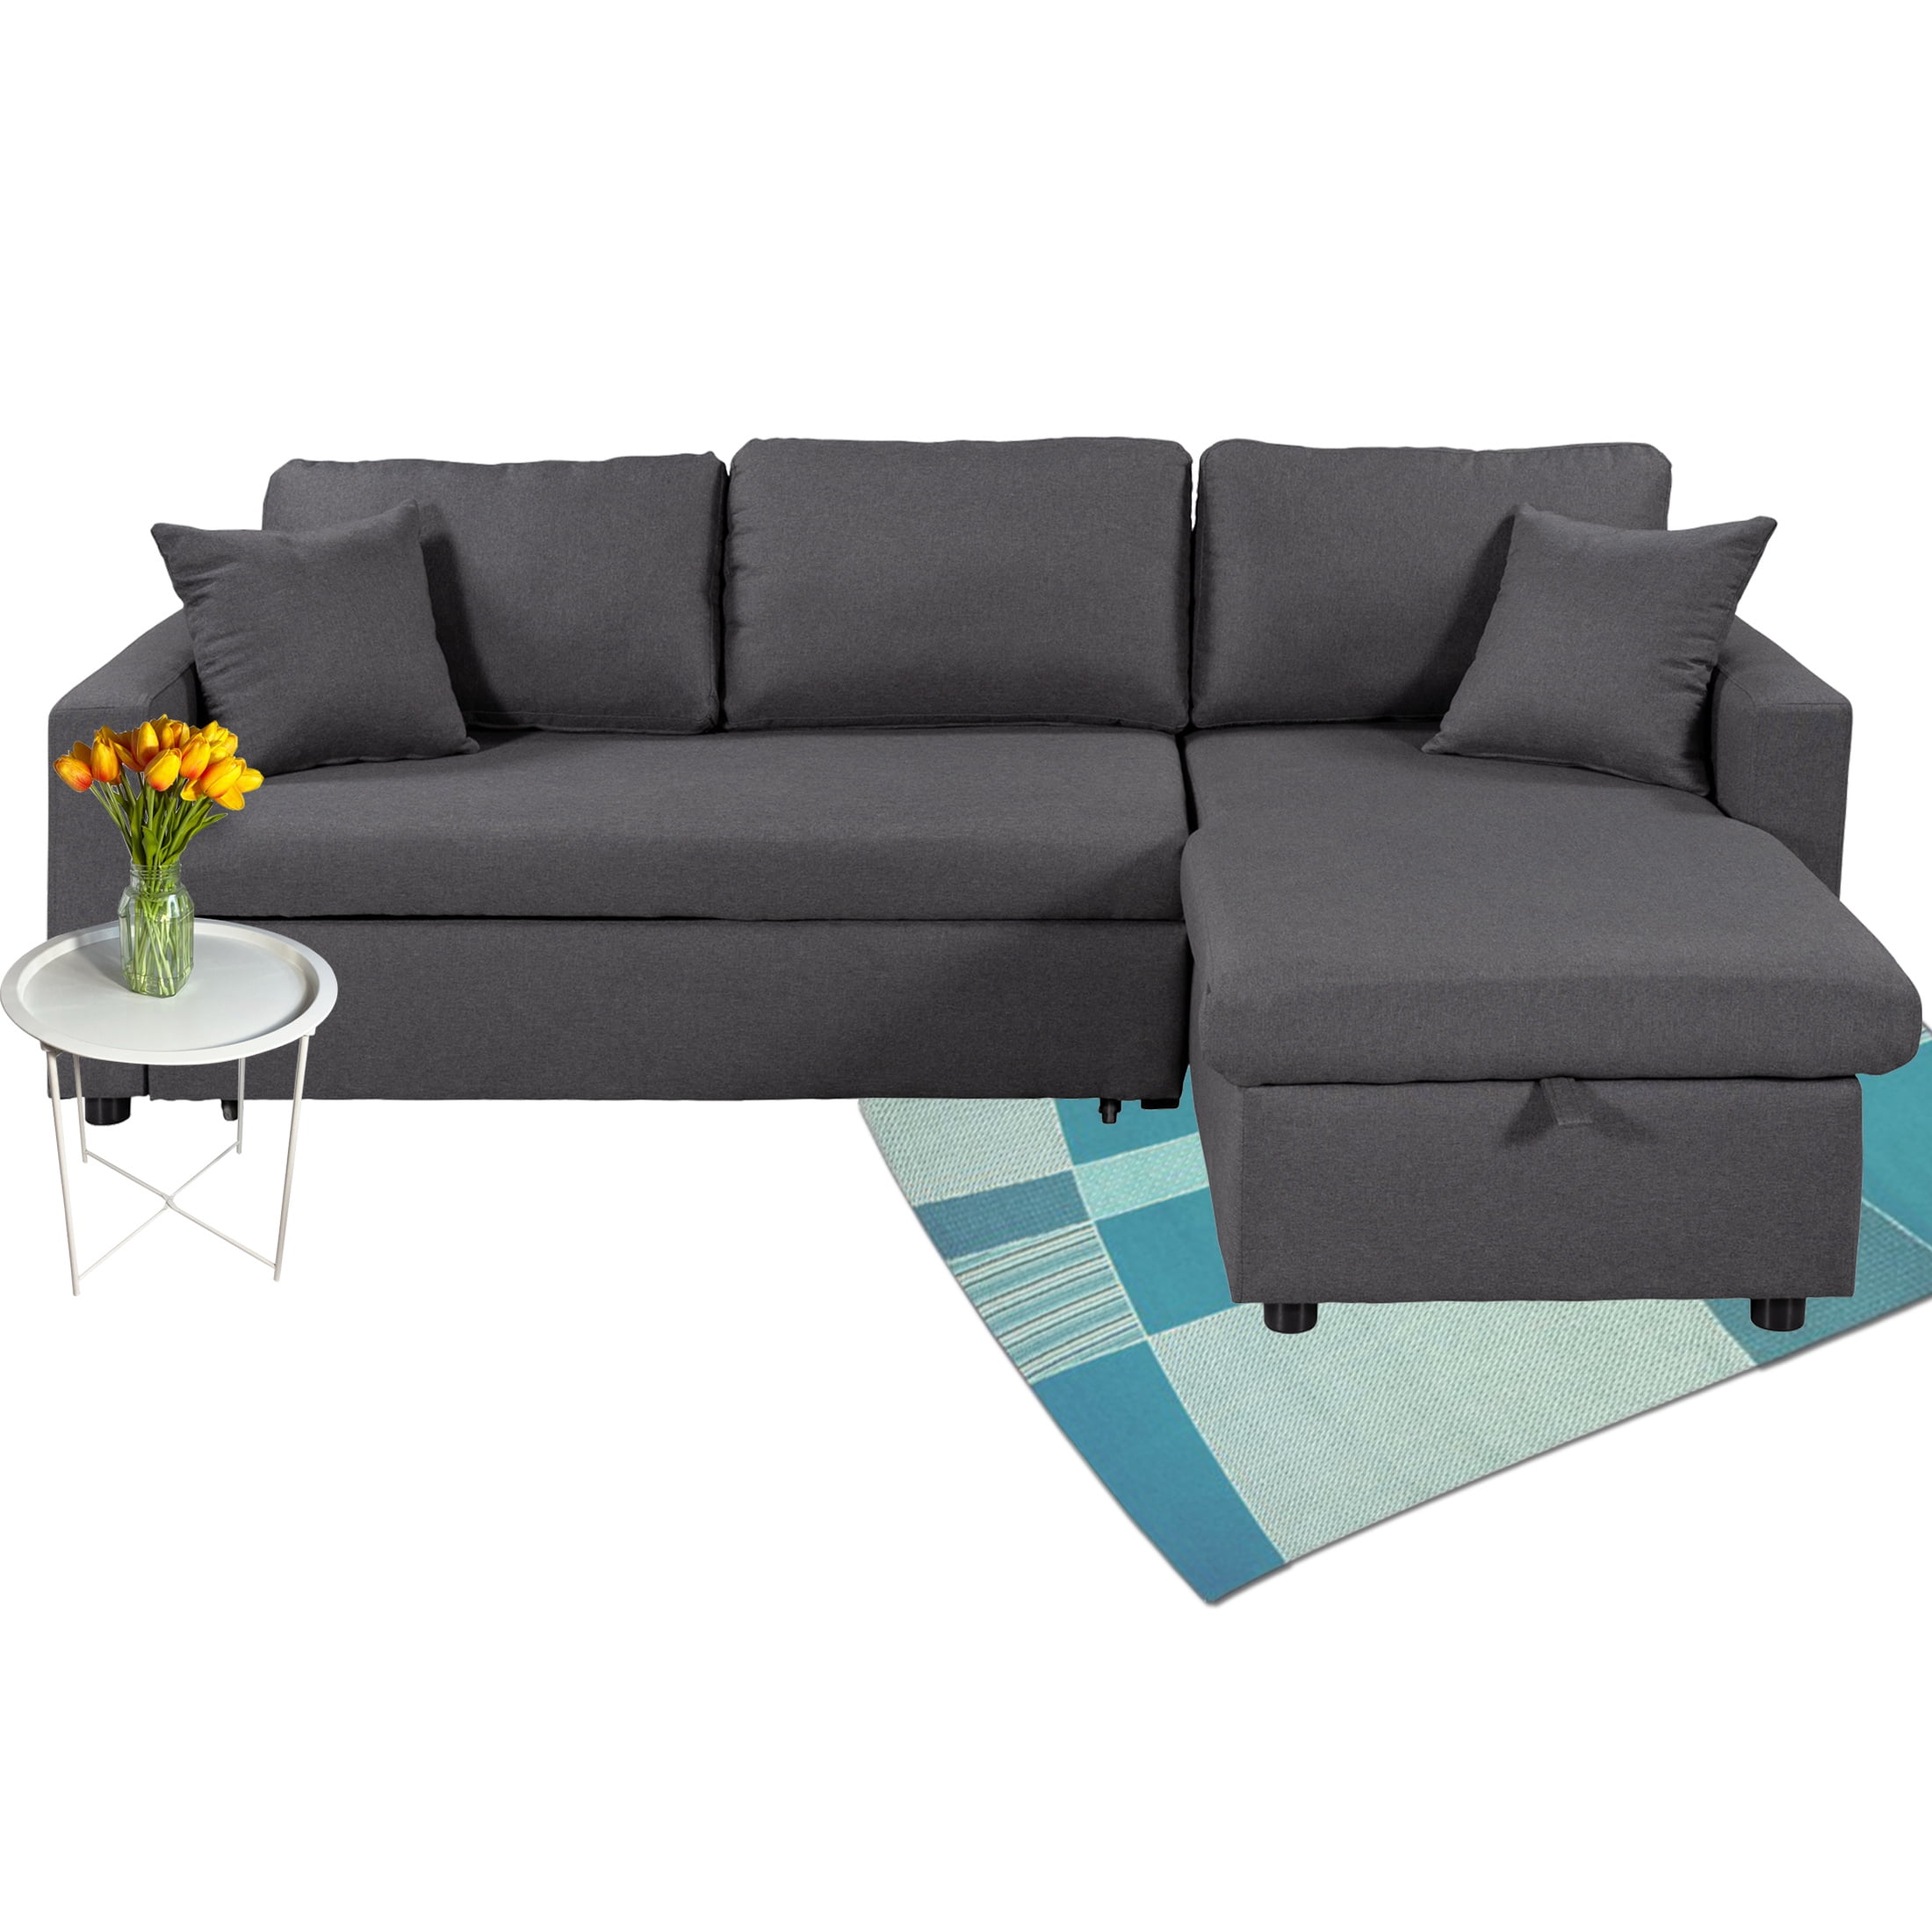 Reversible Sectional Sleeper Sofa Bed, Narrow Pull Out Sofa Bed